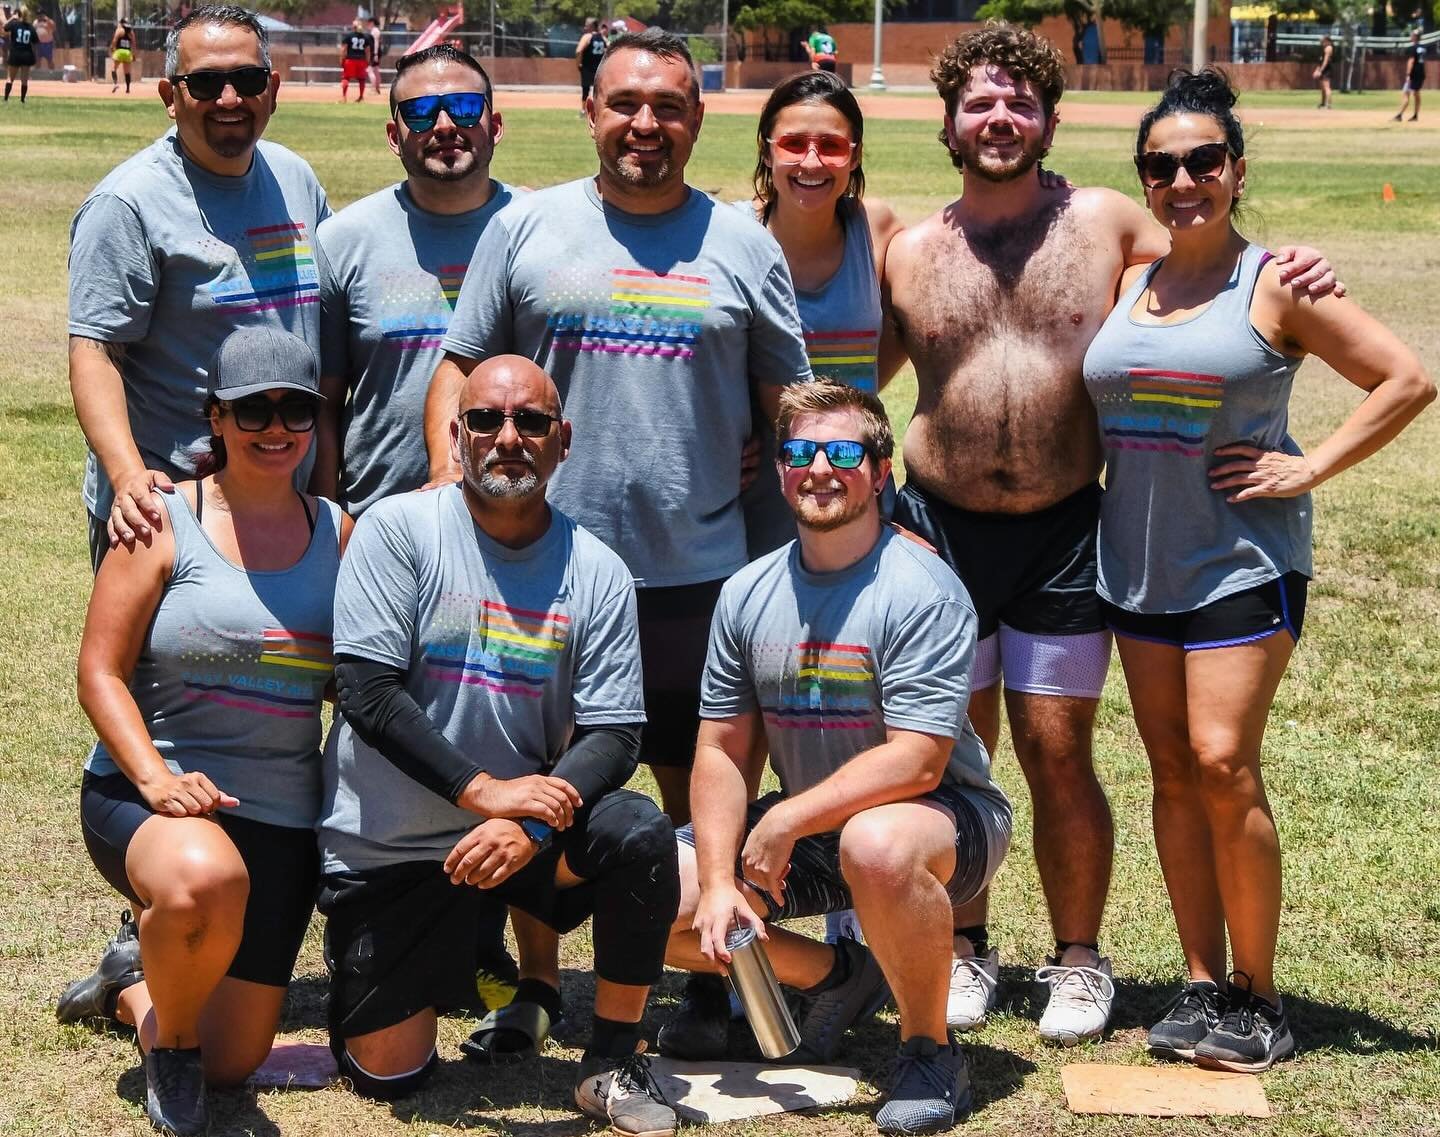 Shout out to today&rsquo;s featured team of the day: The East Valley Allies! ➡️🩶🏳️&zwj;🌈🩶